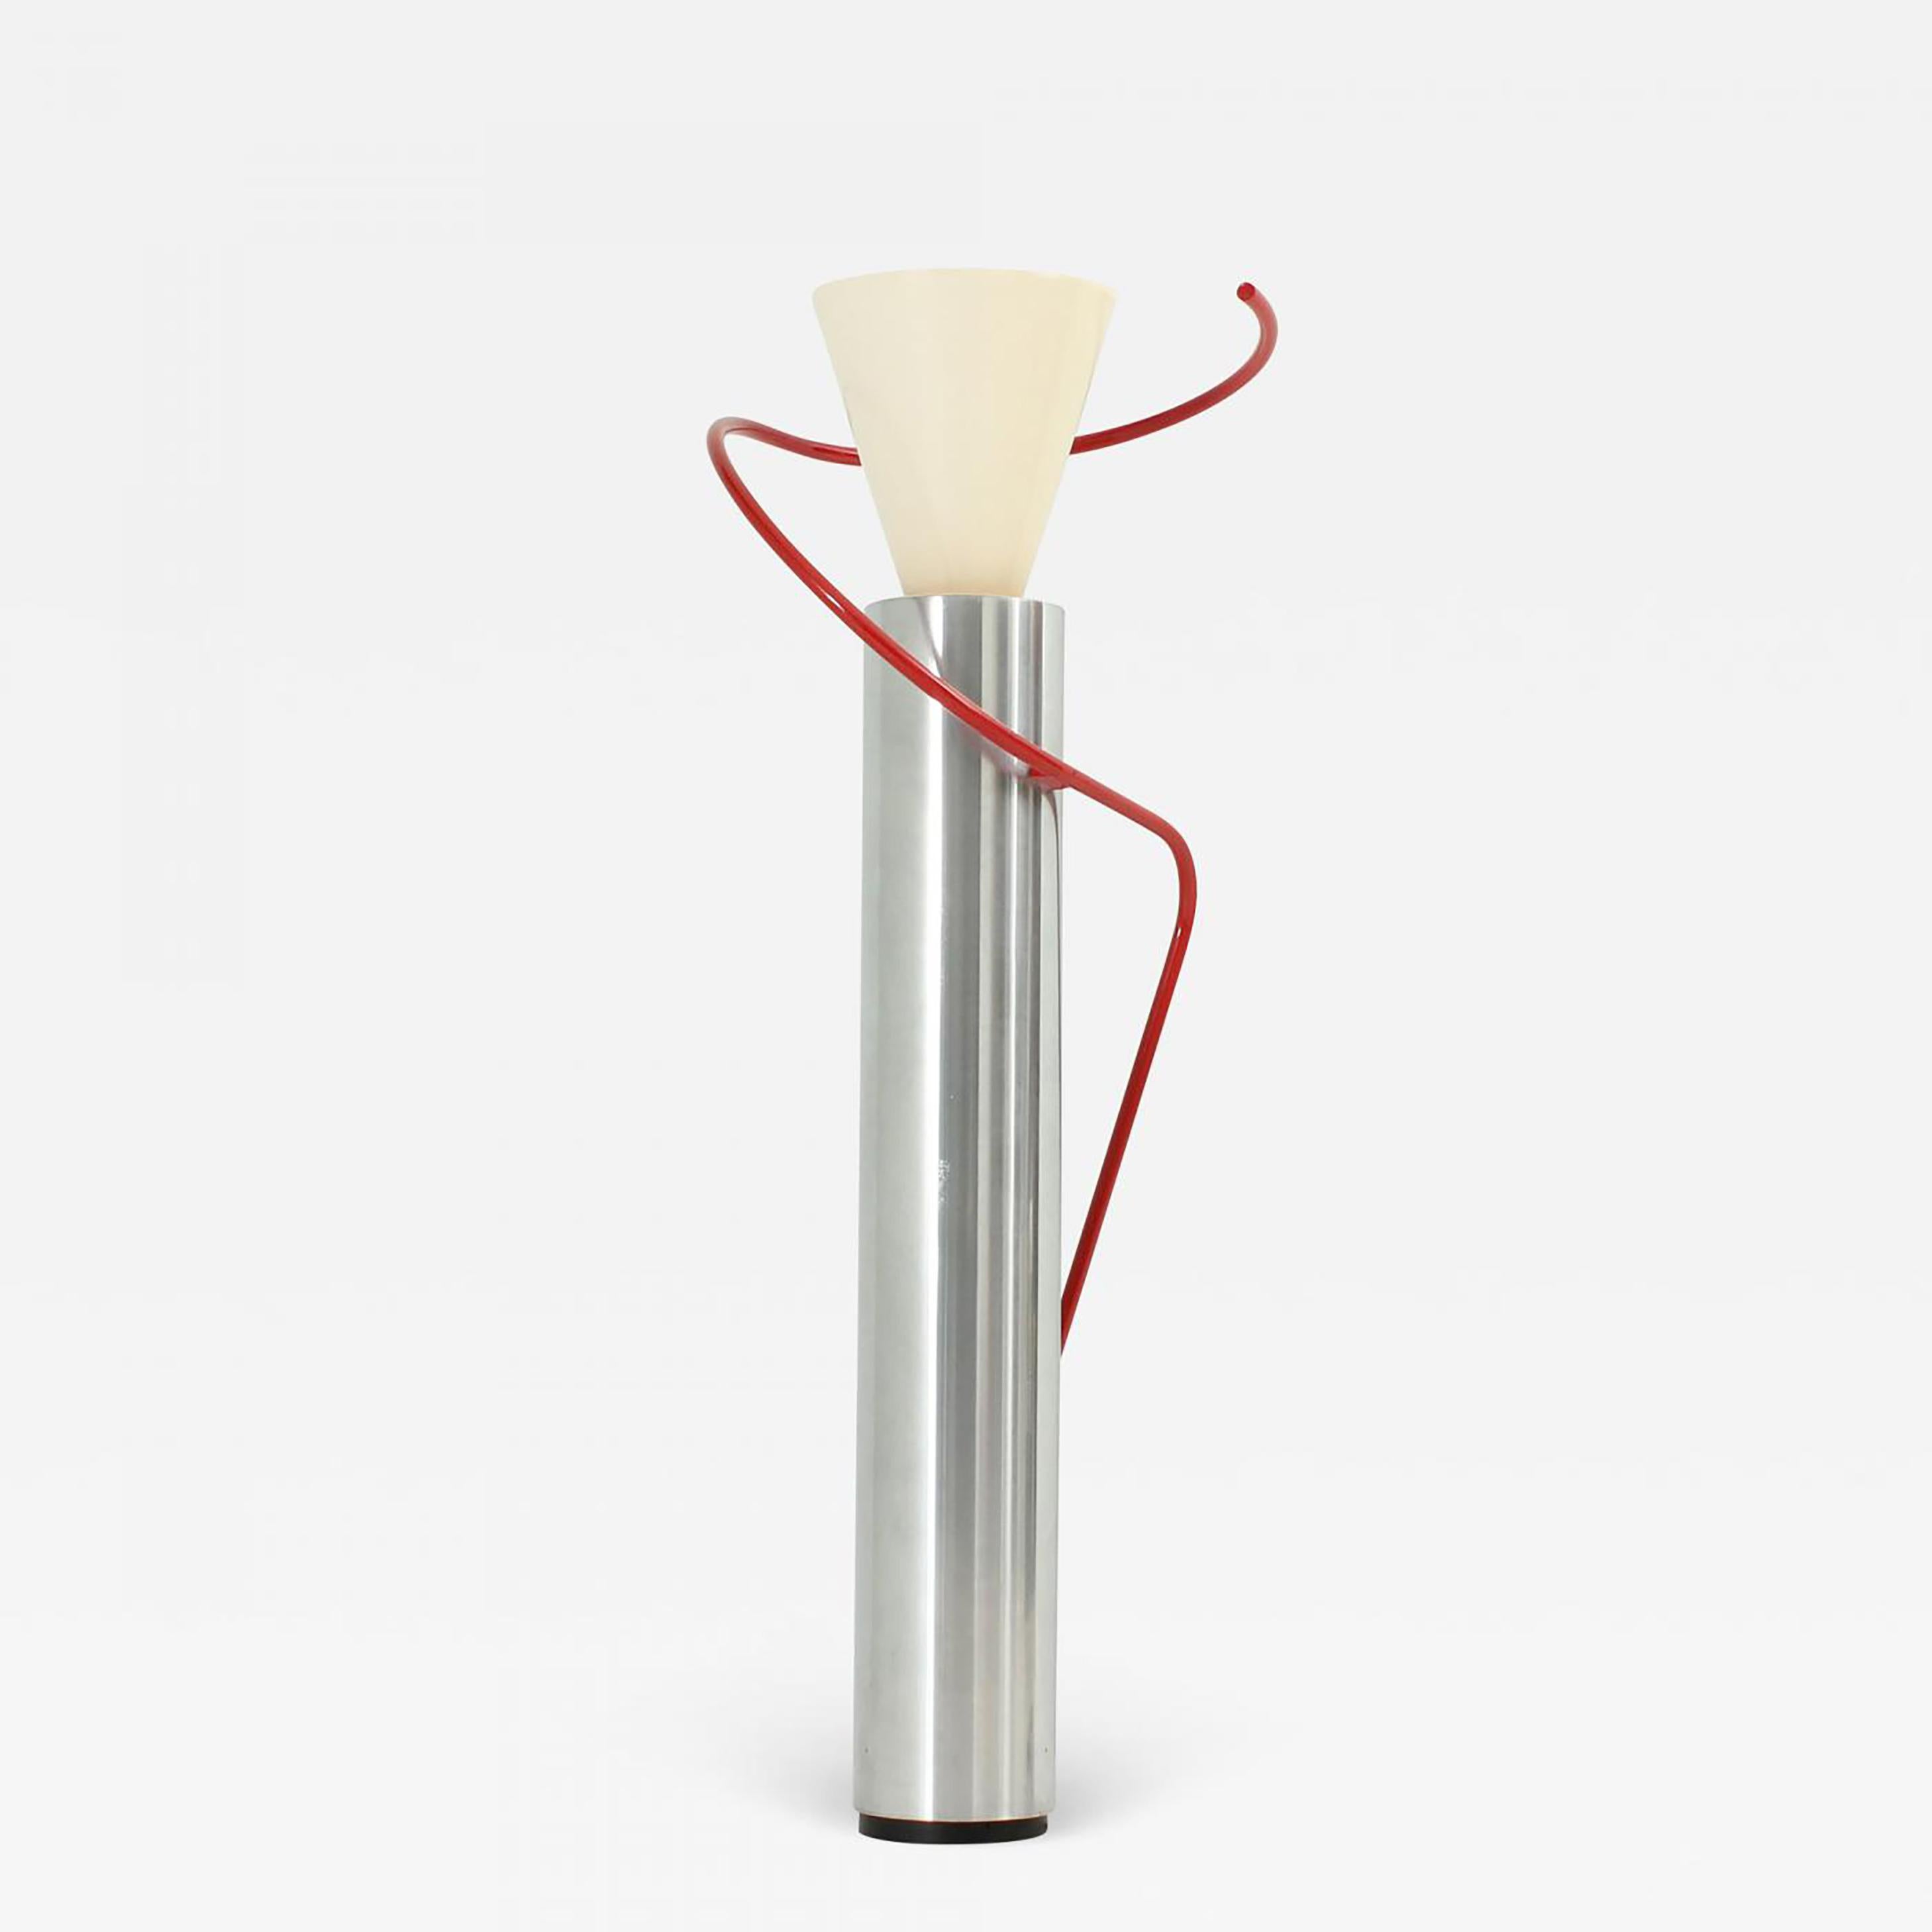 Floor lamp
Steel
Luciano Baldessari
Manufacturer / Brand : Luceplan
Model / Name : Luminator
Estimated period
1974
Italy
very good condition - some wear and tear due to age
180×40×40 cm
Weight
60 kg

The Italian architect Luciano